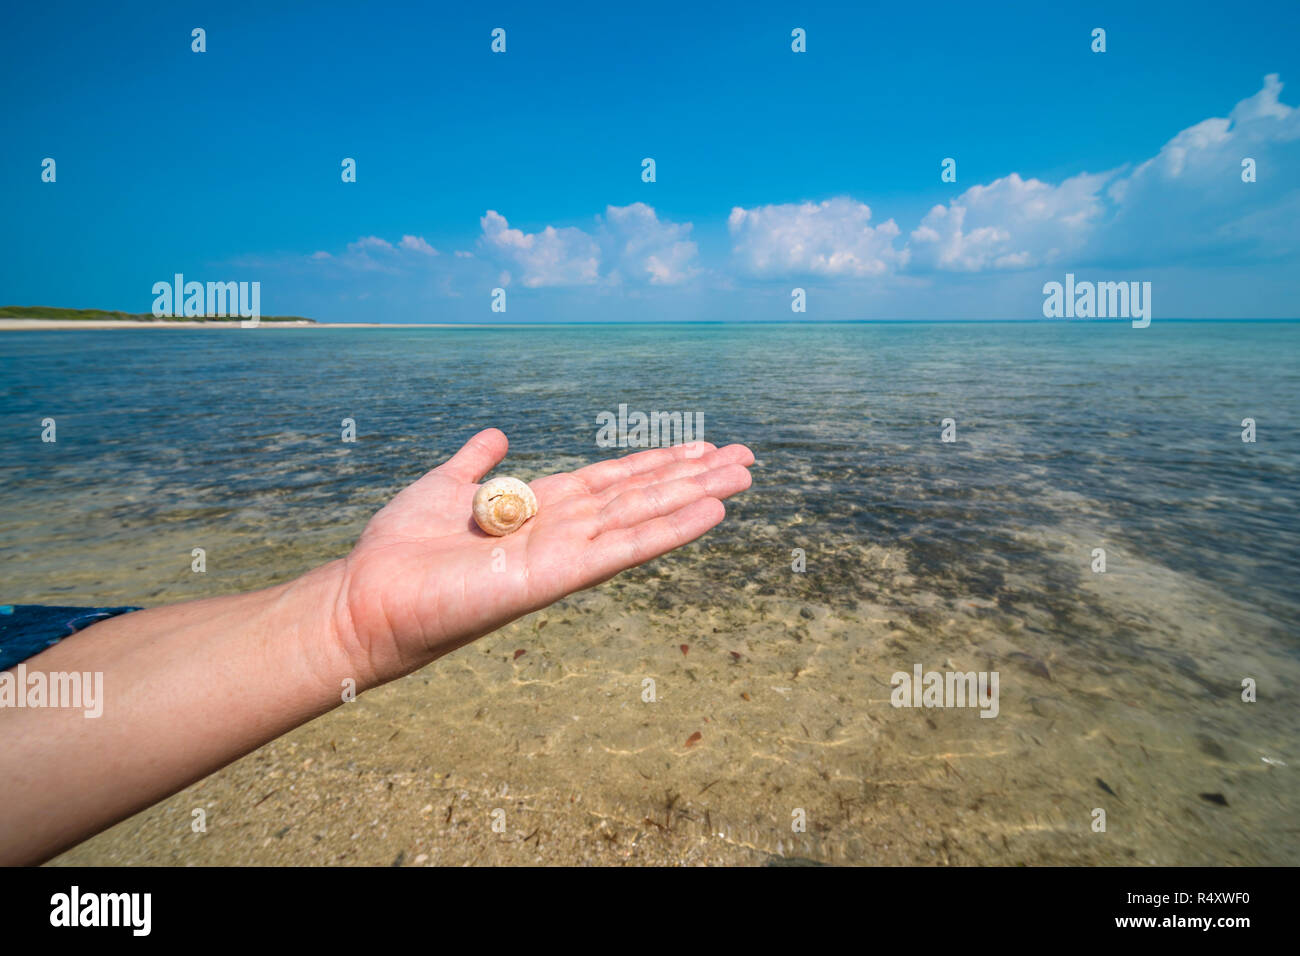 A tourist holds up a shell on a beach on Paradise Island, Mozambique. Stock Photo